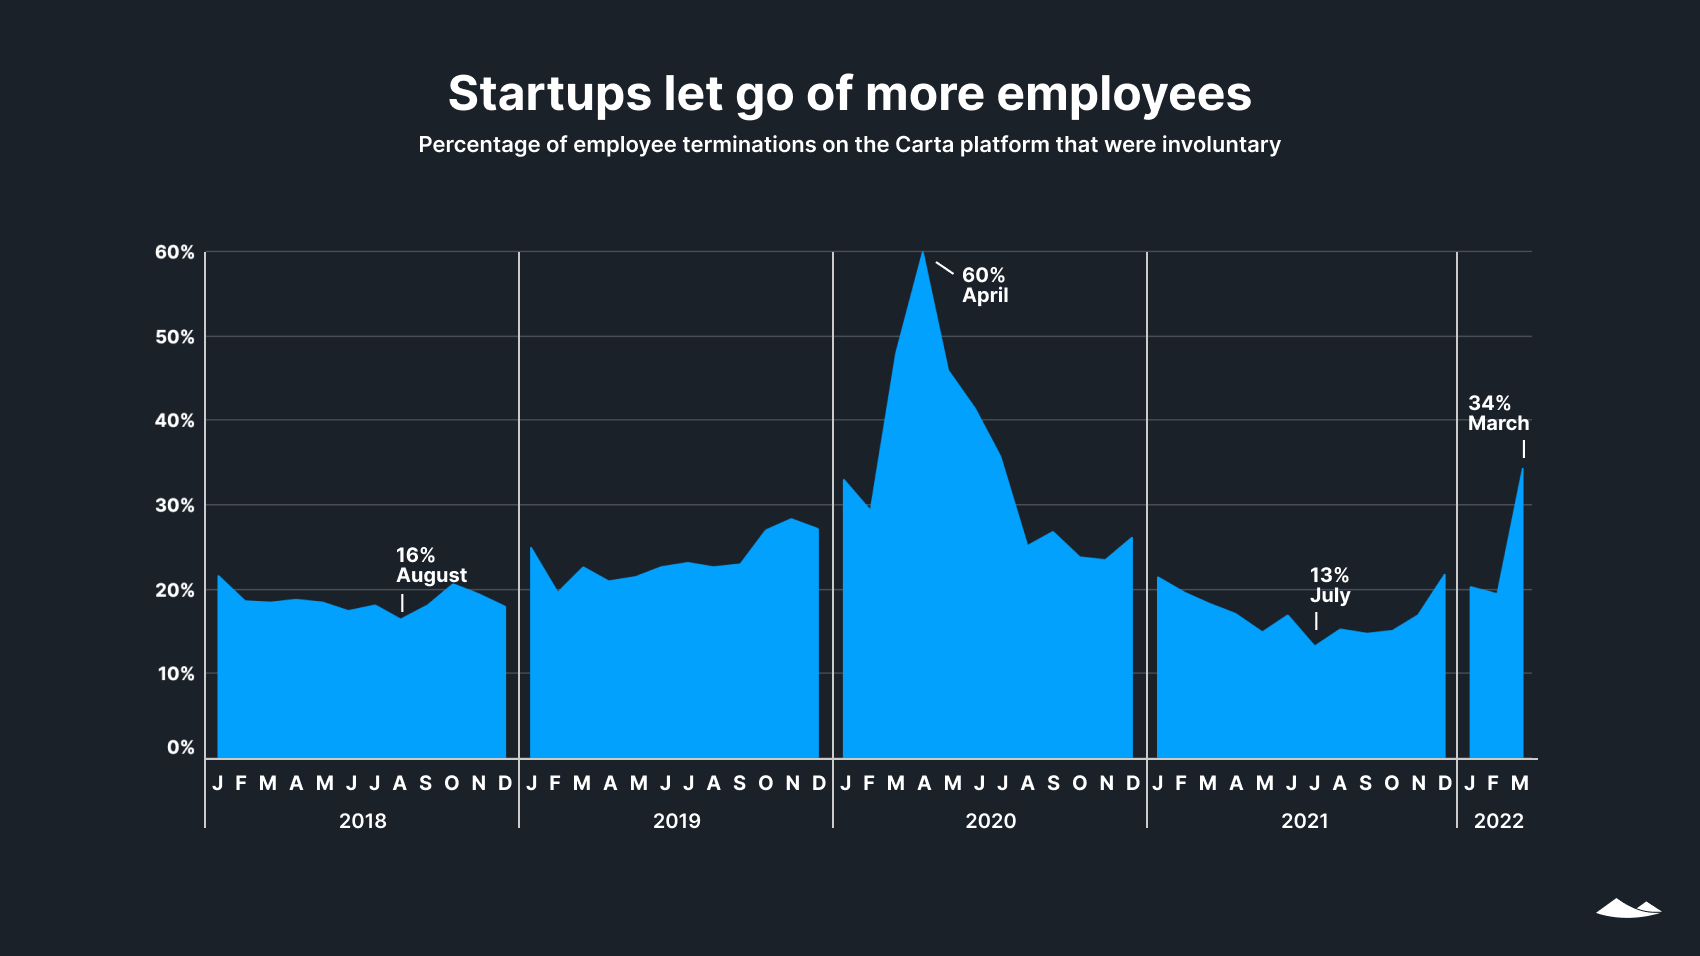 Area chart shows the percentage of voluntary startup employee terminations spiked to 34% in March, up from 20% in February.